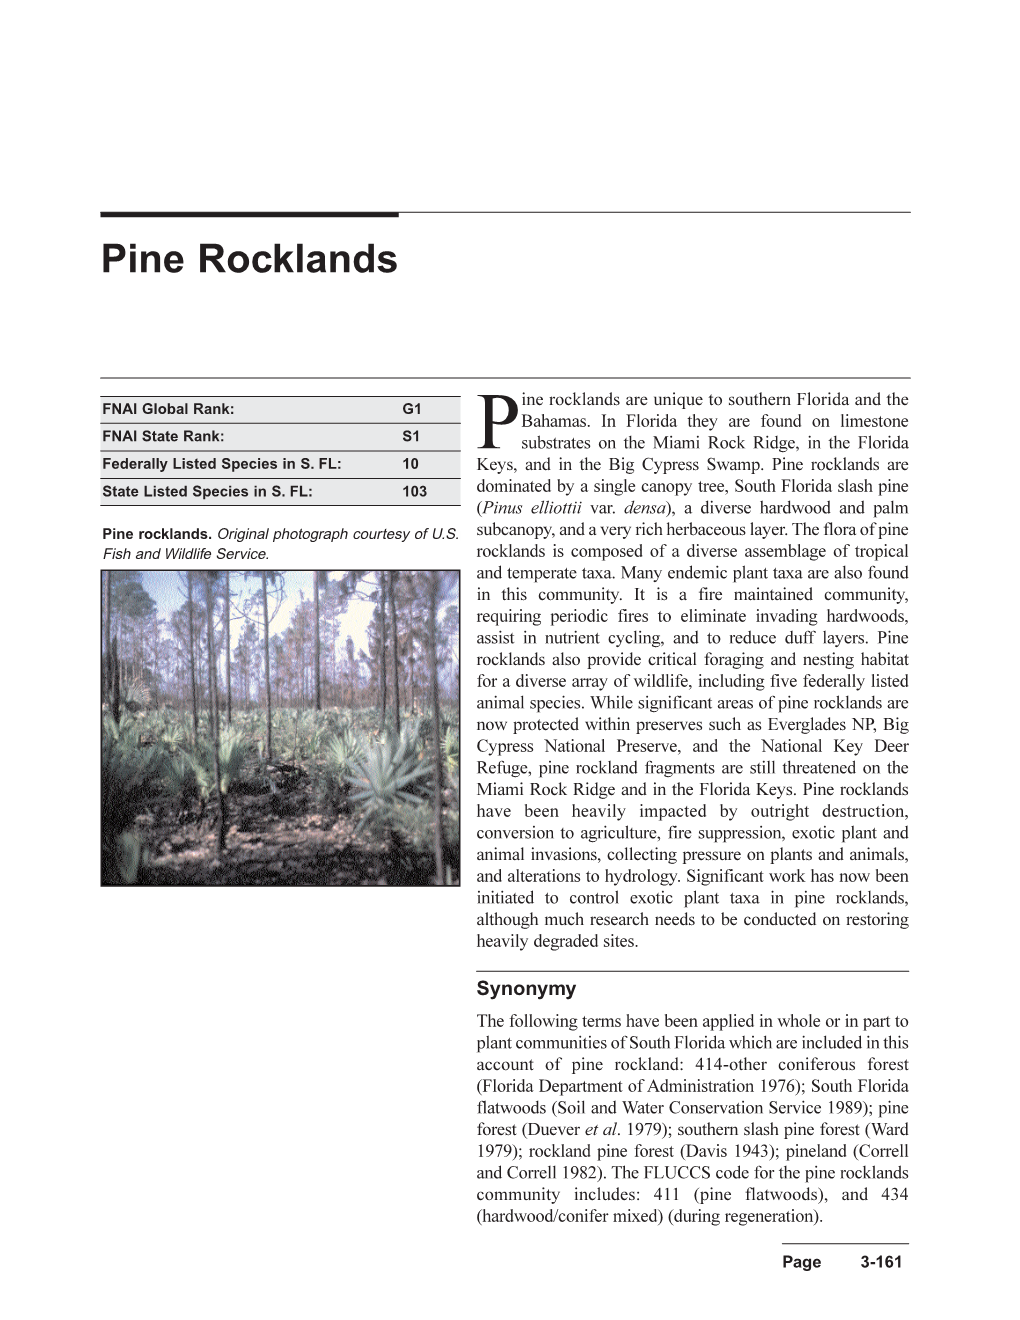 Pine Rocklands Are Unique to Southern Florida And